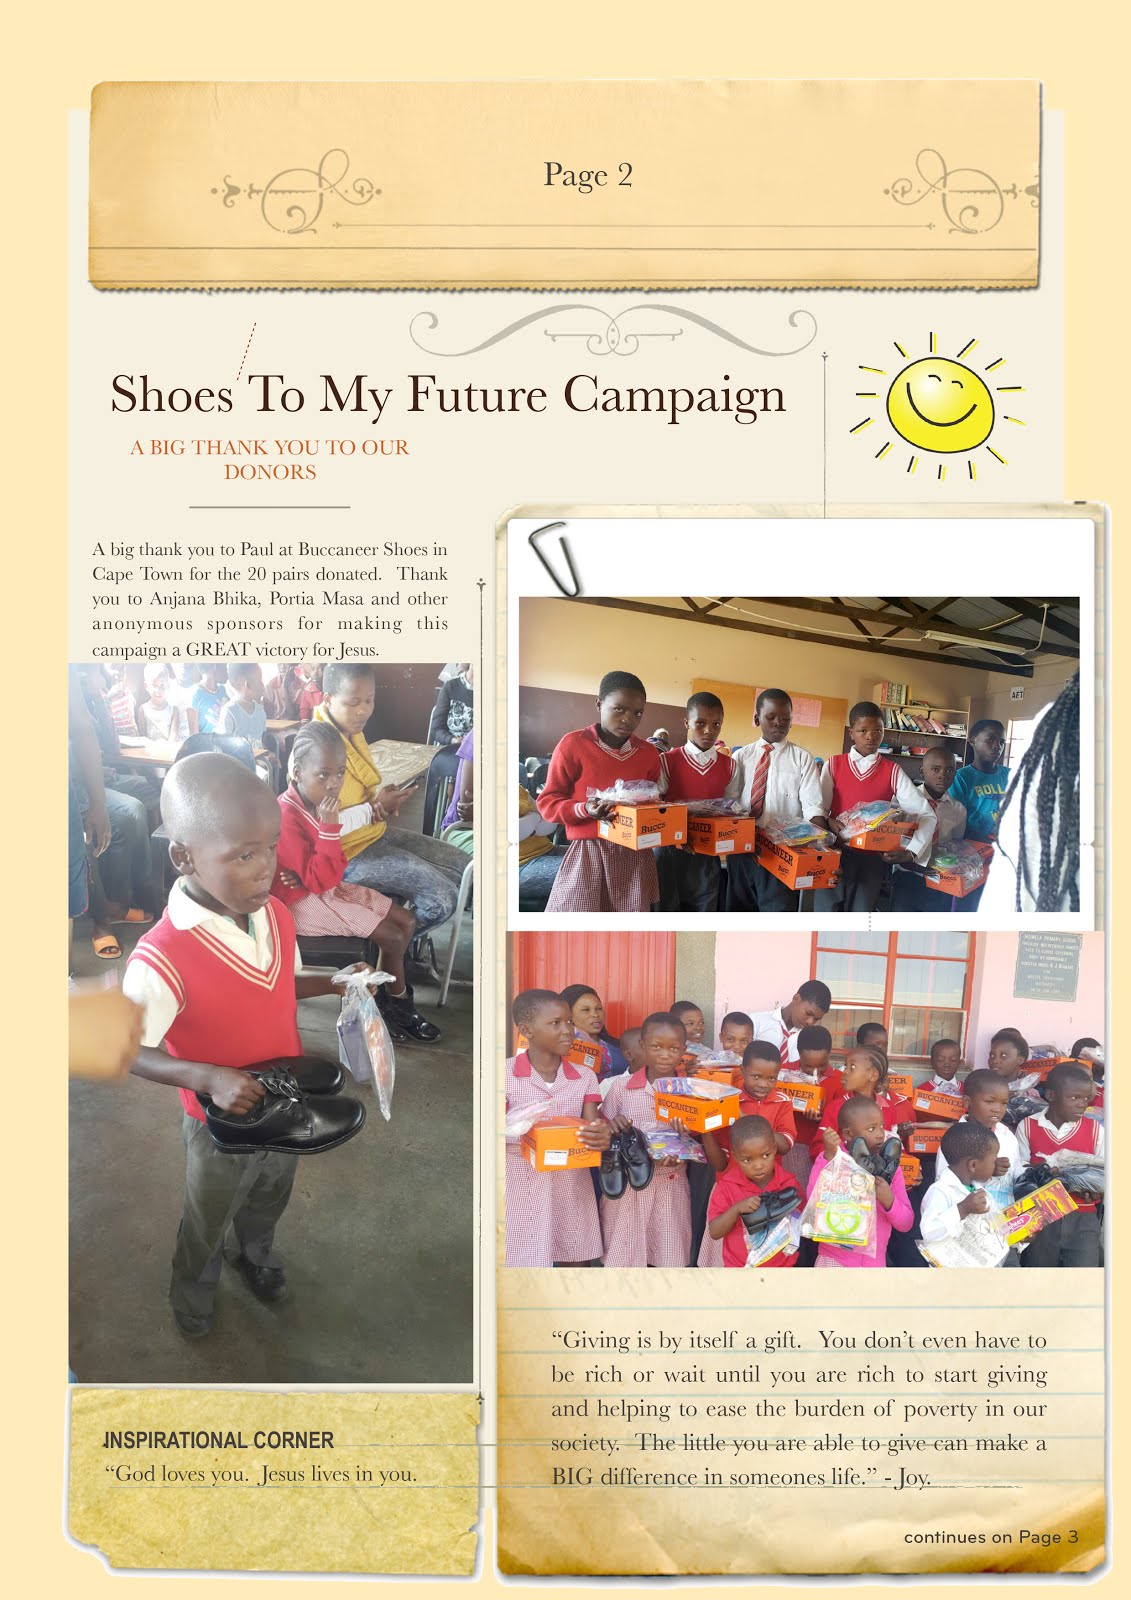 JoyGivesHope School Shoes campaign makes a difference.